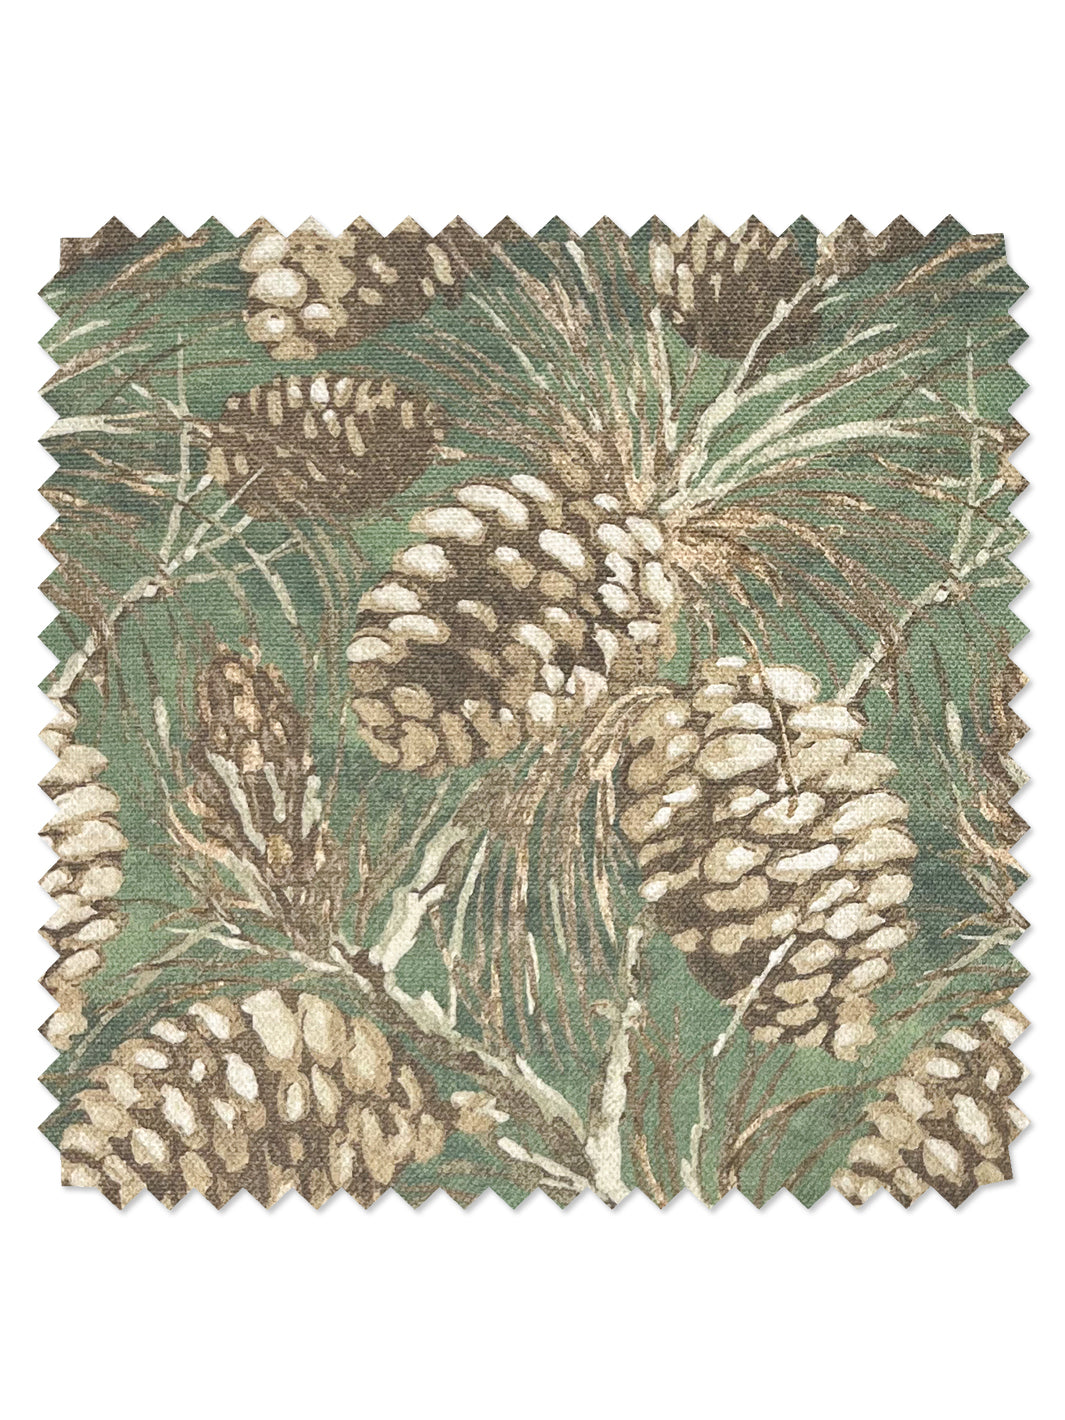 'Pinecones' Linen Fabric by Nathan Turner - Moss